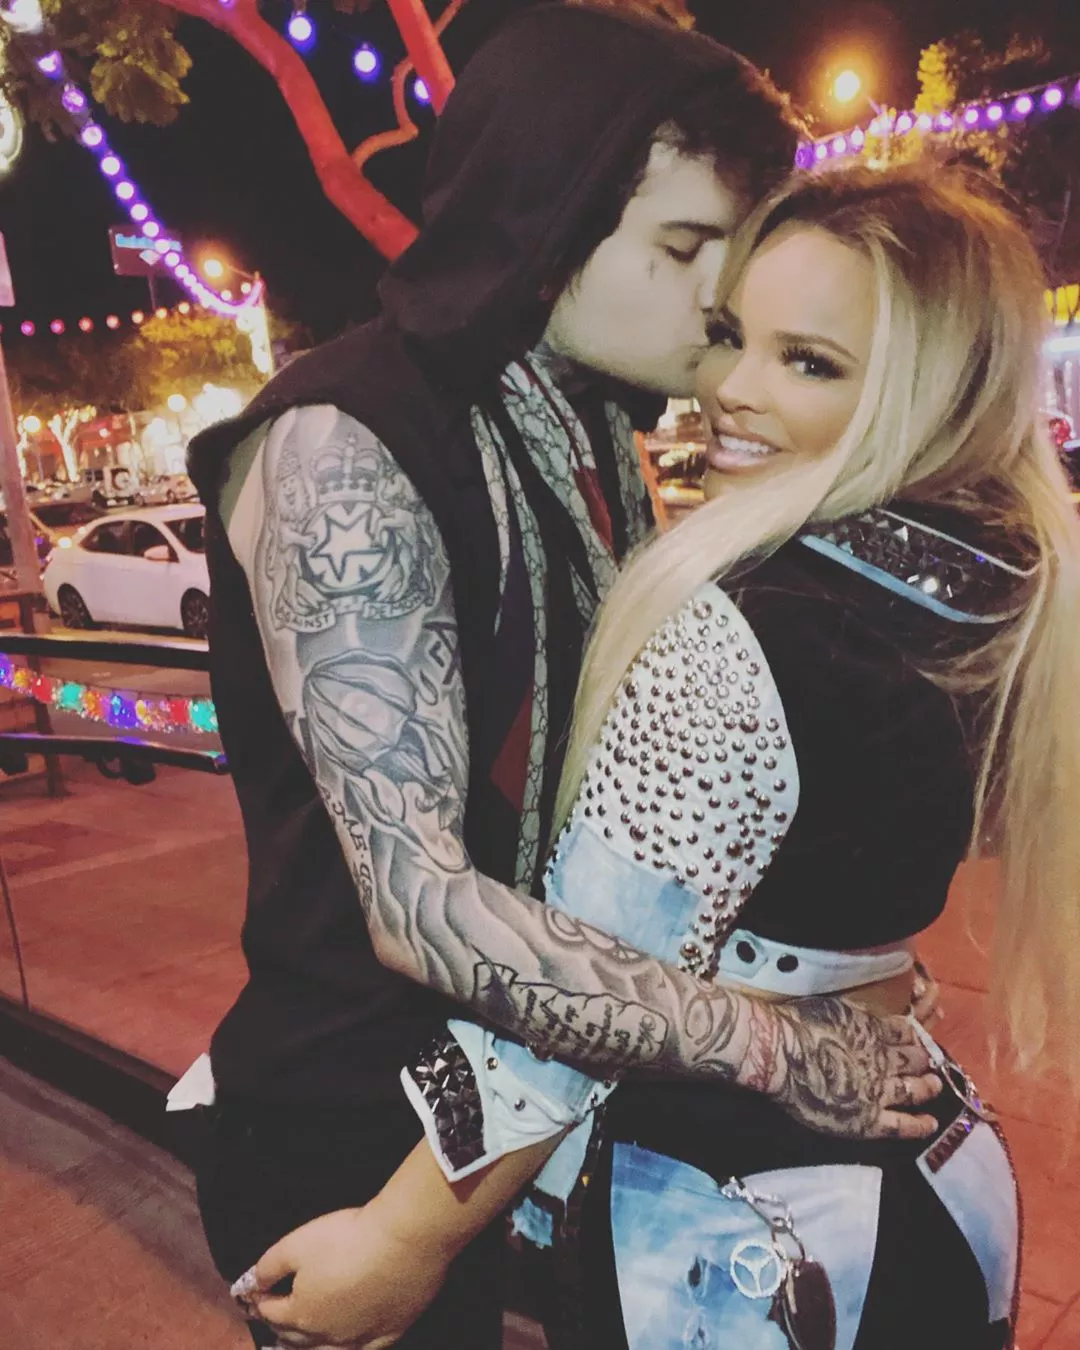 Trisha Paytas, Controversial r, Posts Instagram Video with